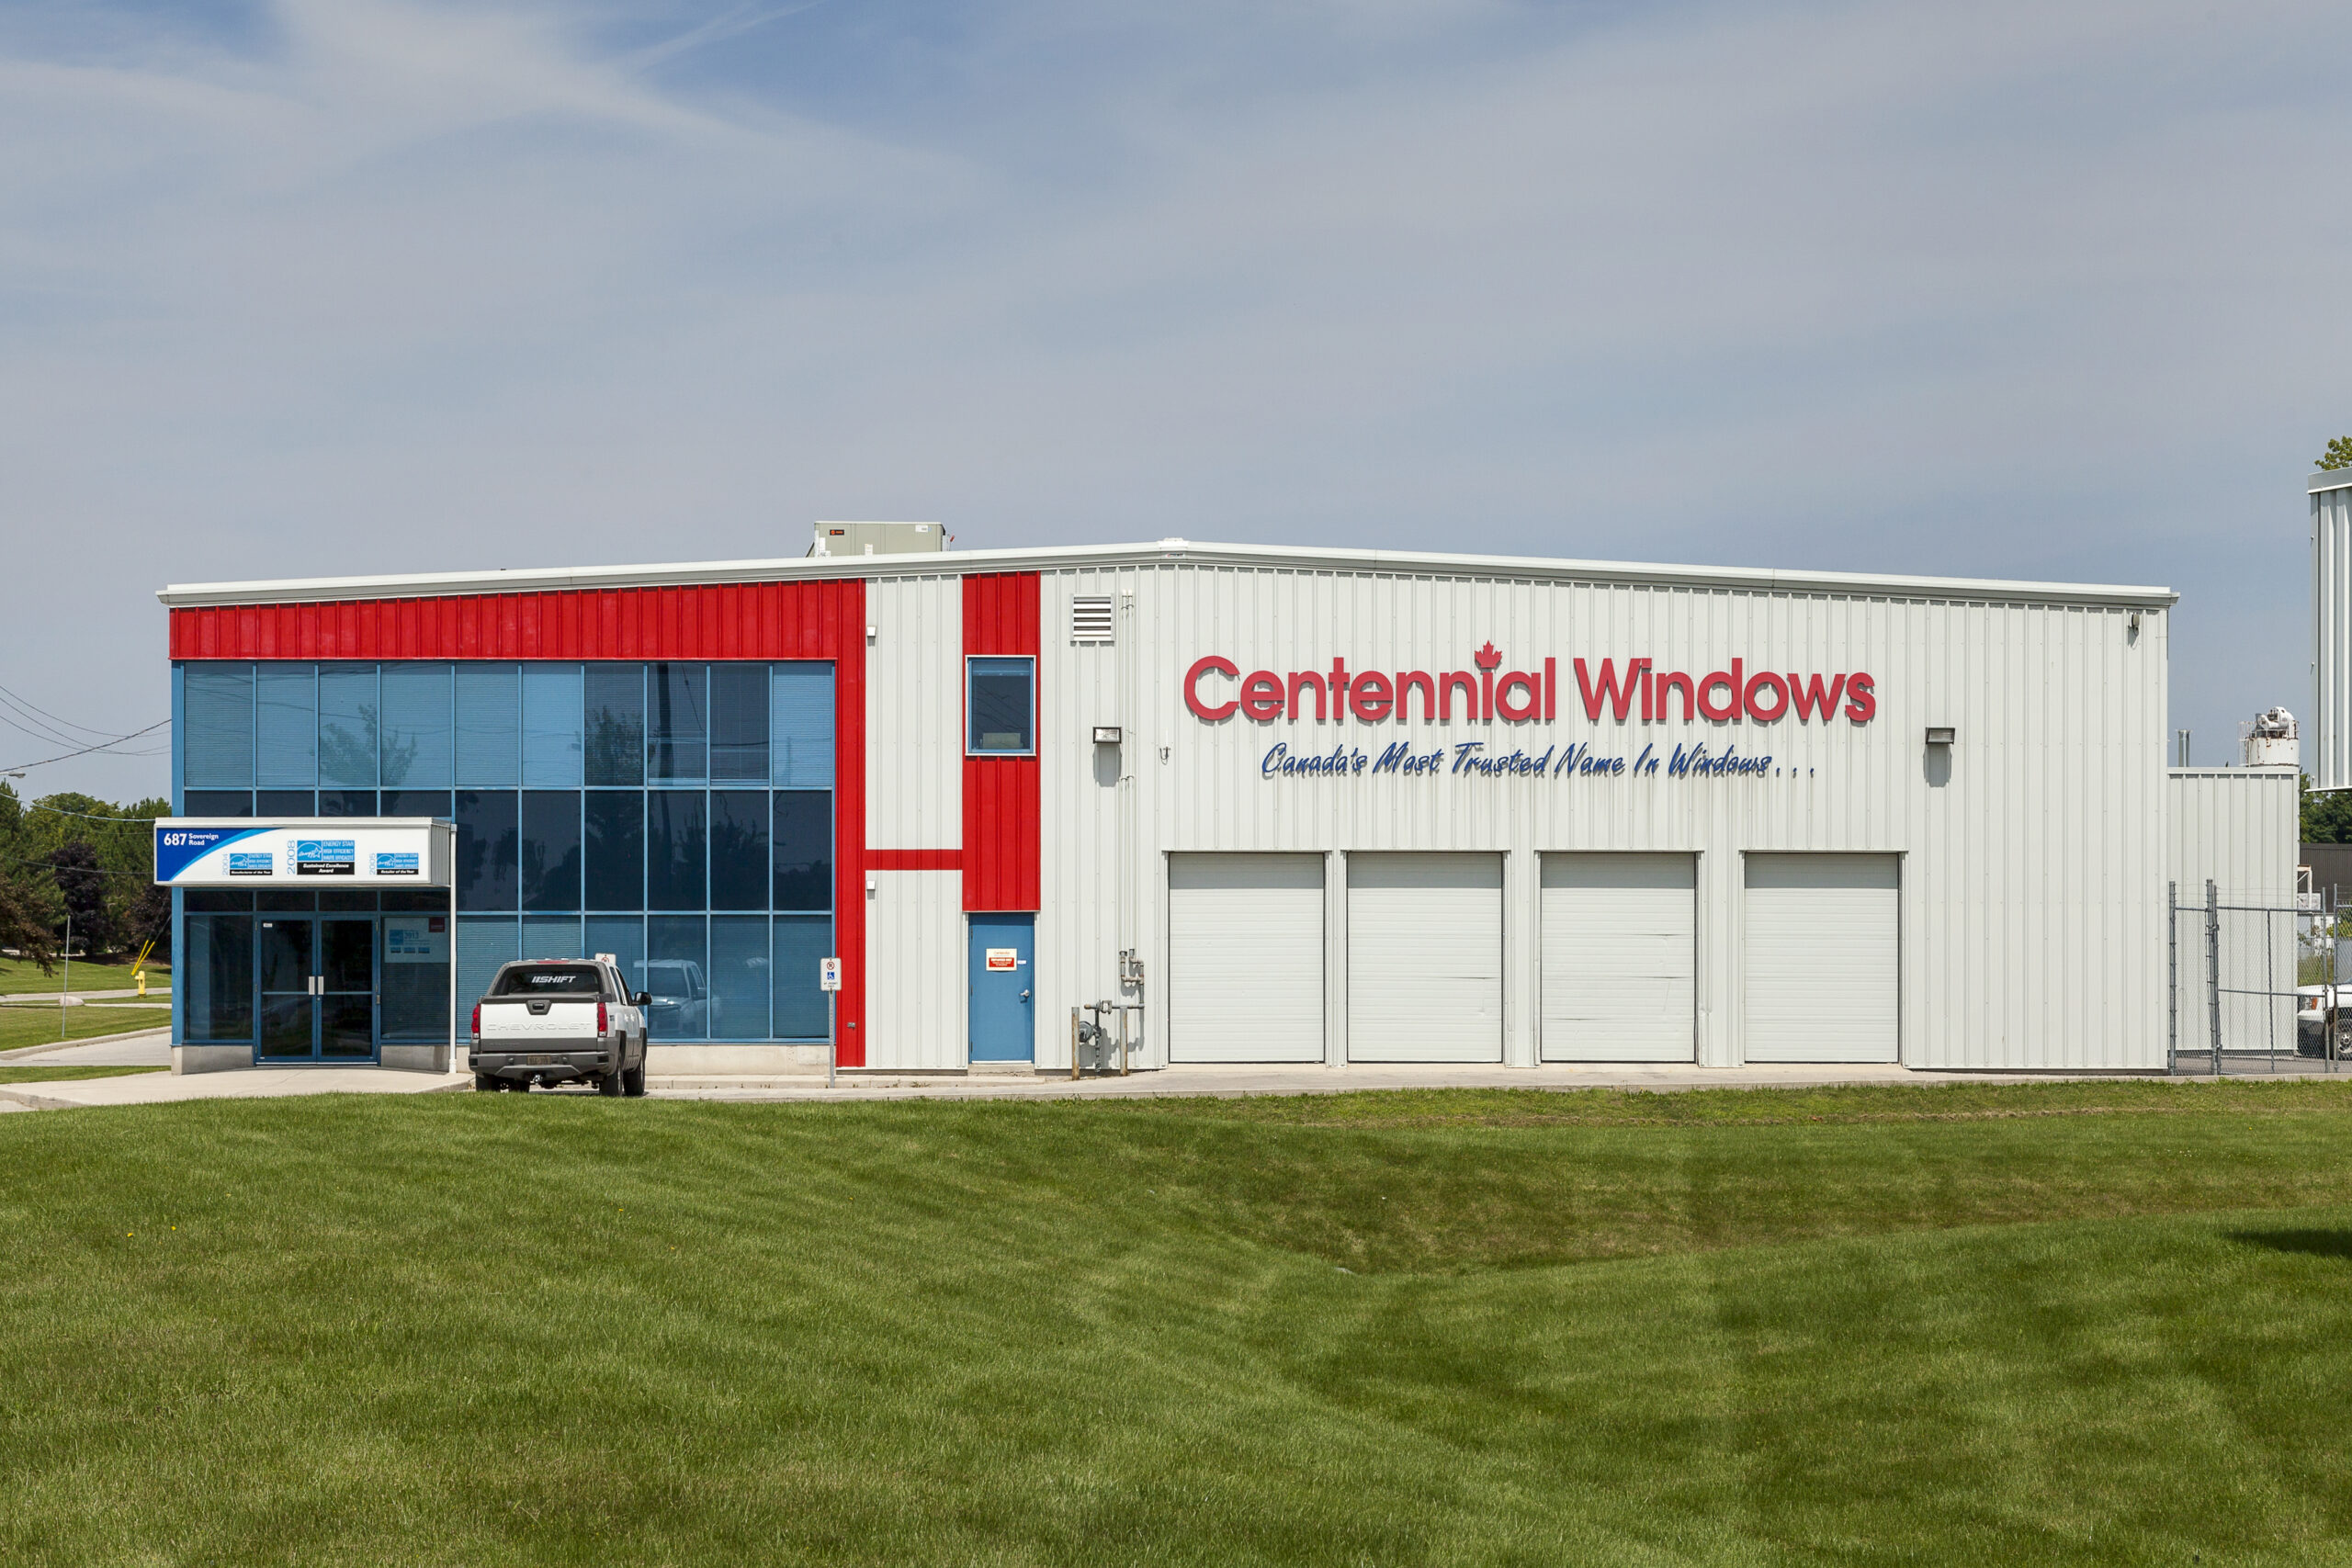 Supporting image for Centennial Windows